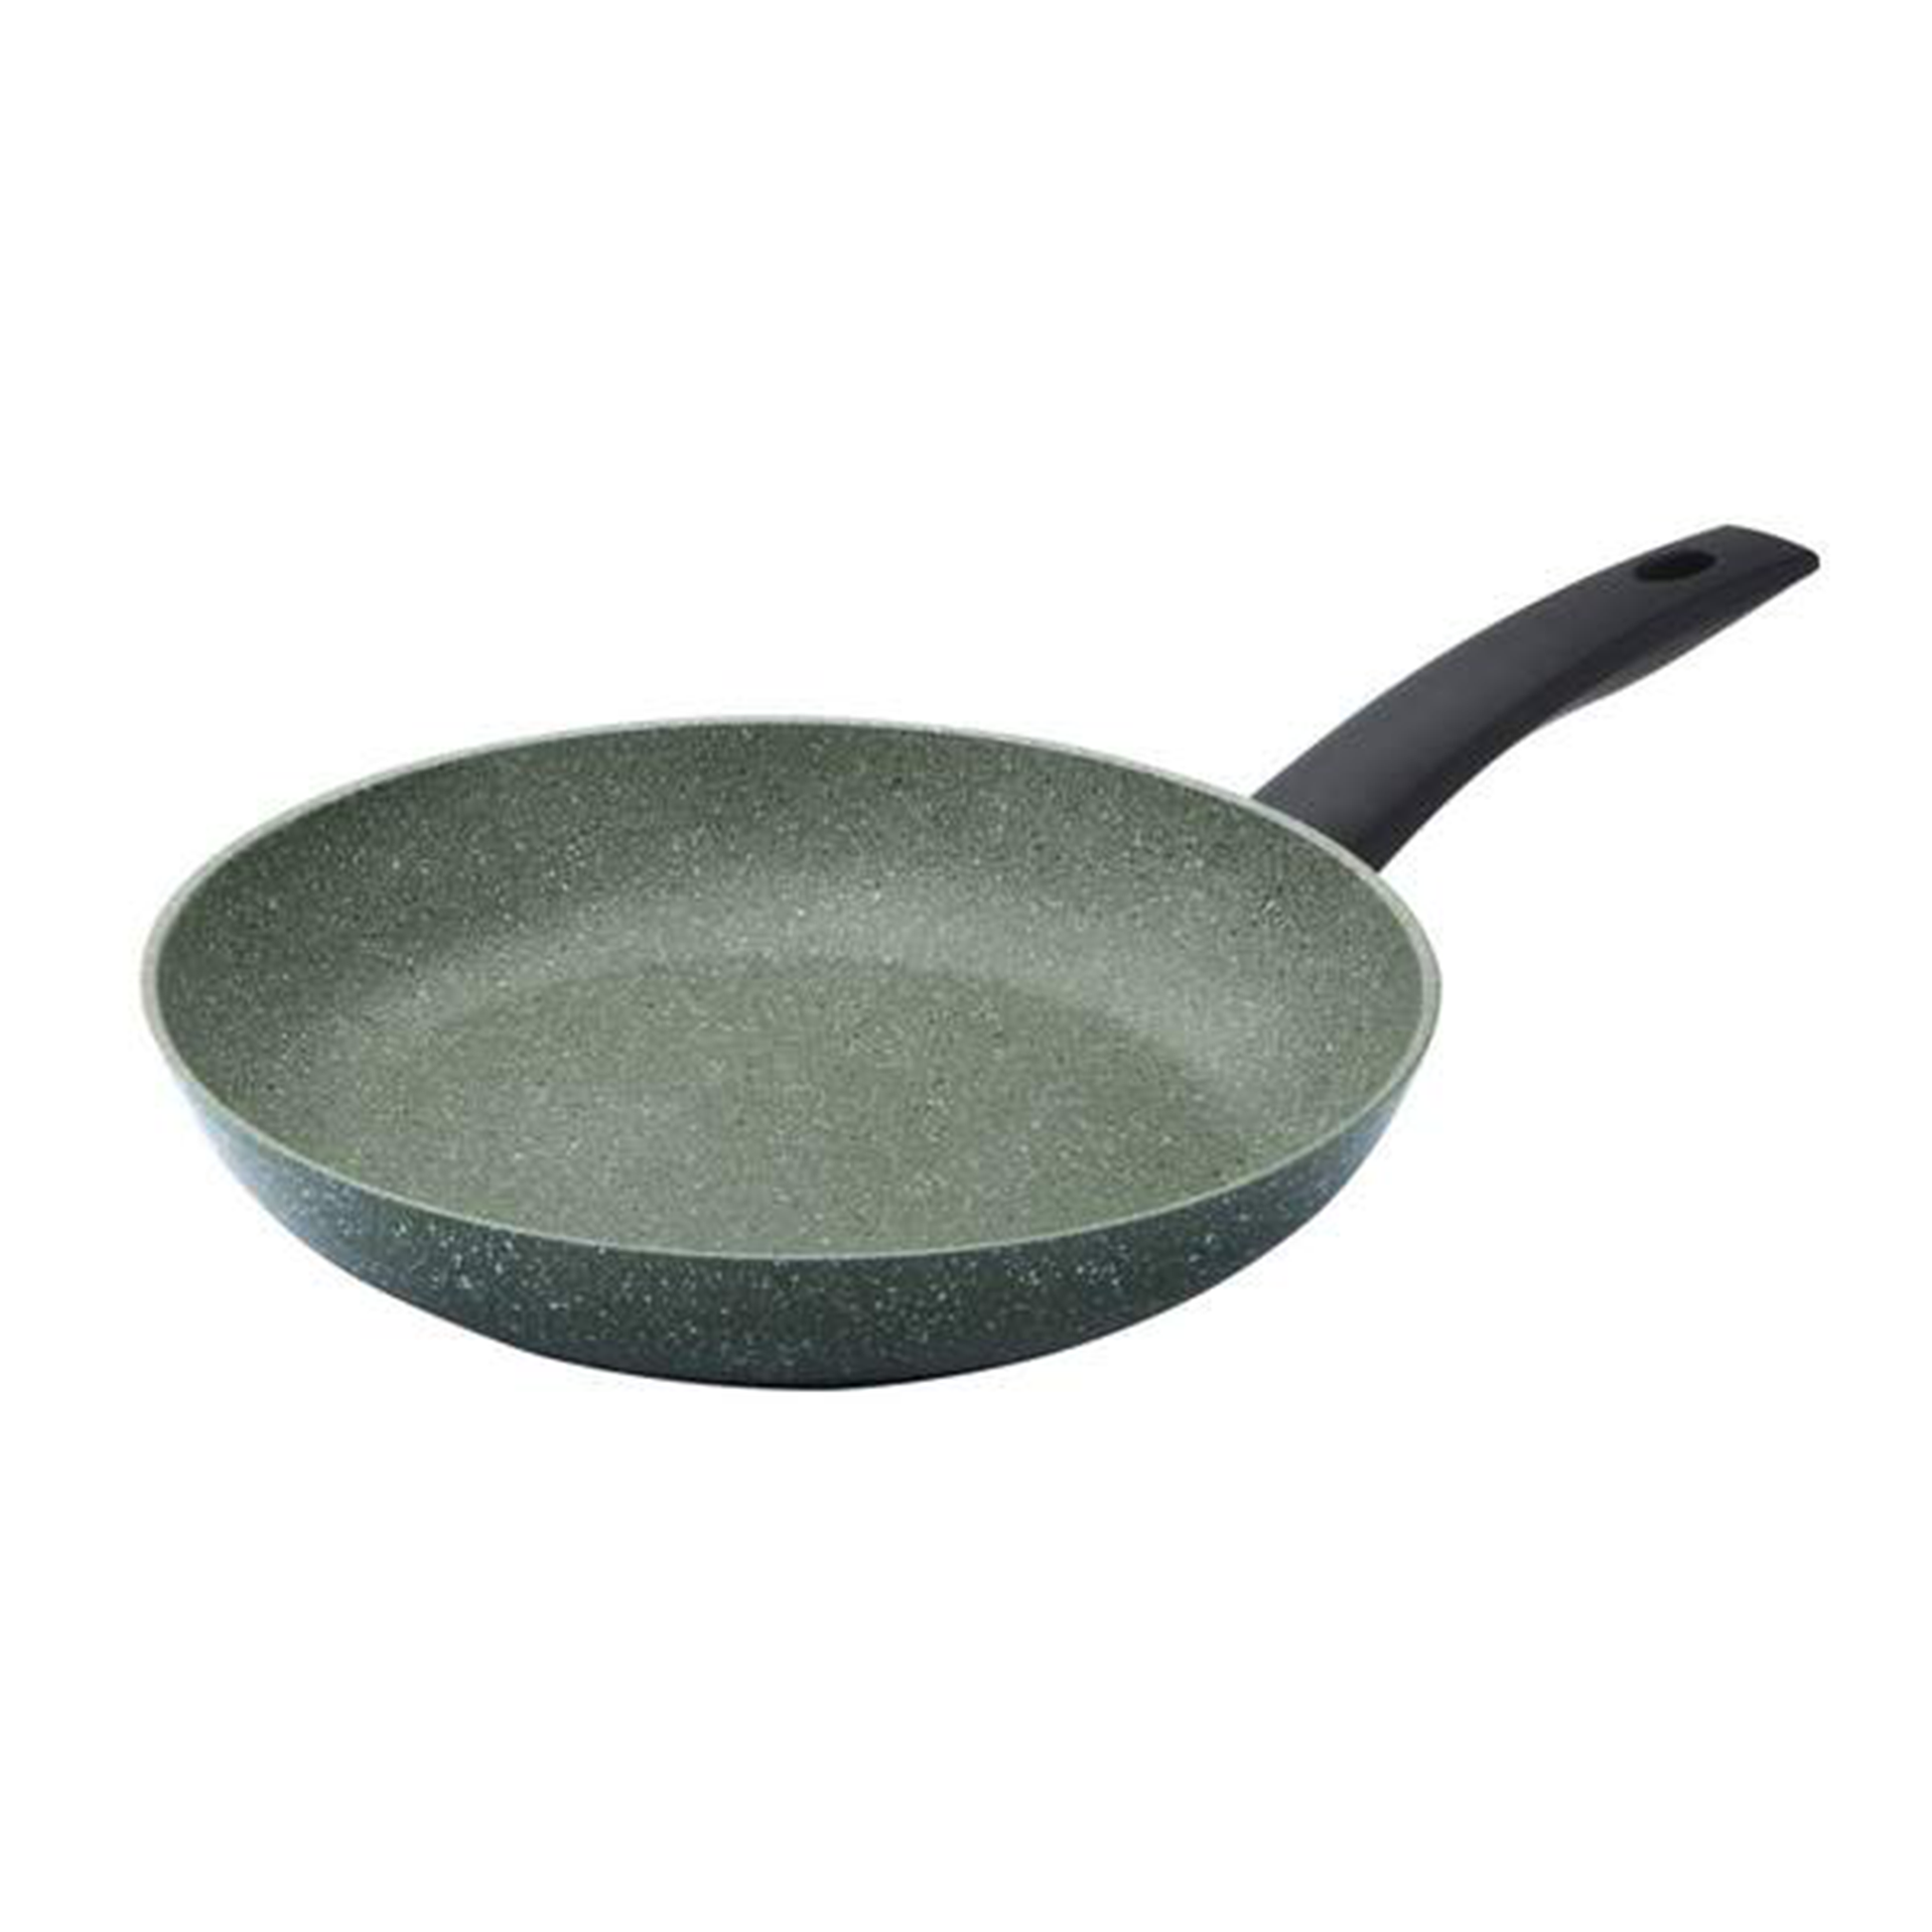 a green specled pan with a black handle